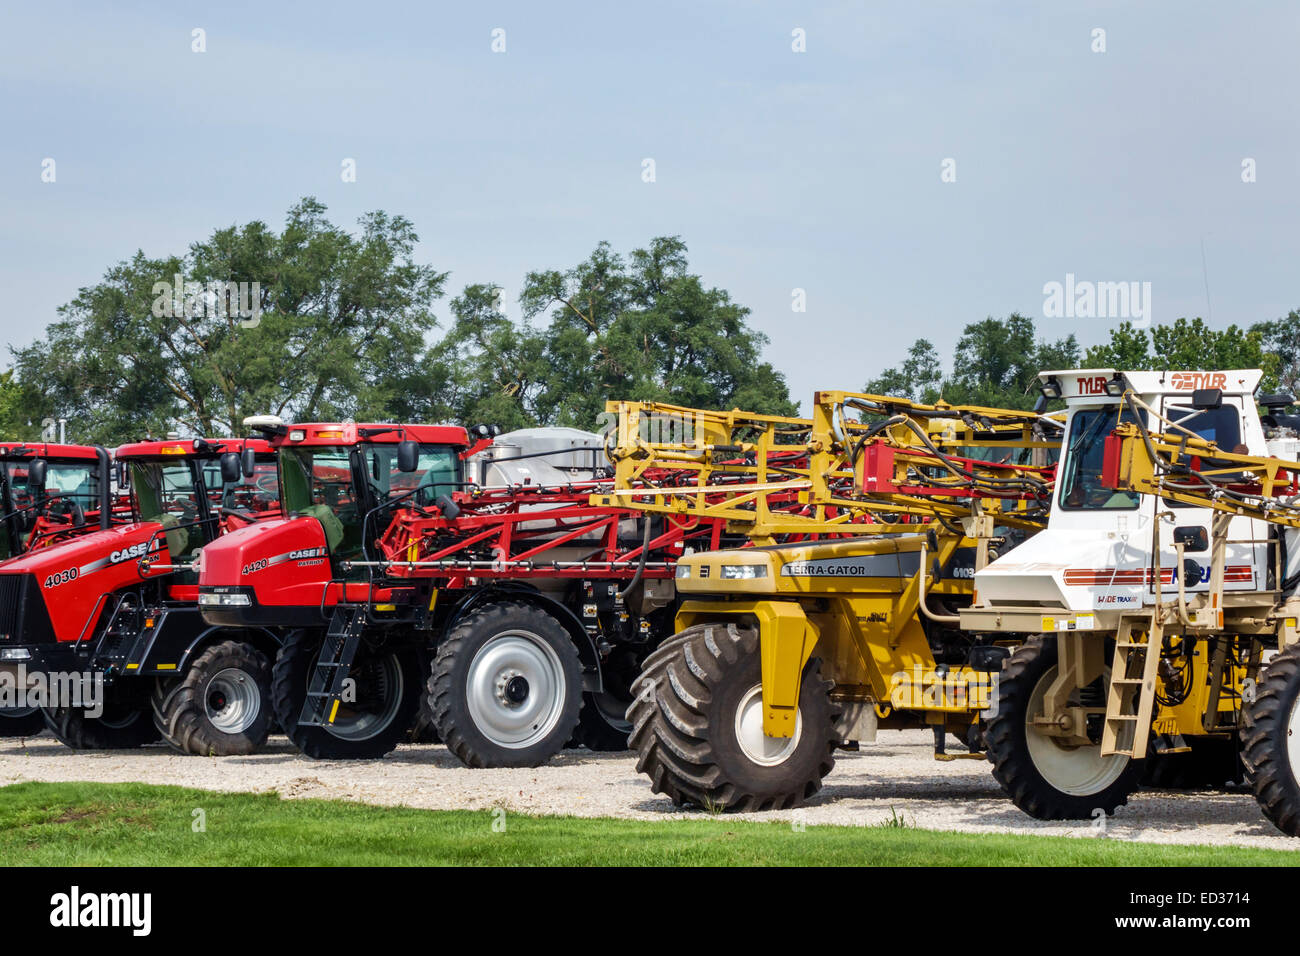 Illinois Decatur,Case,combines,display sale agriculture,agricultural,farming,harvesters,equipment,dealer,spreaders,tractors,IL140904009 Stock Photo